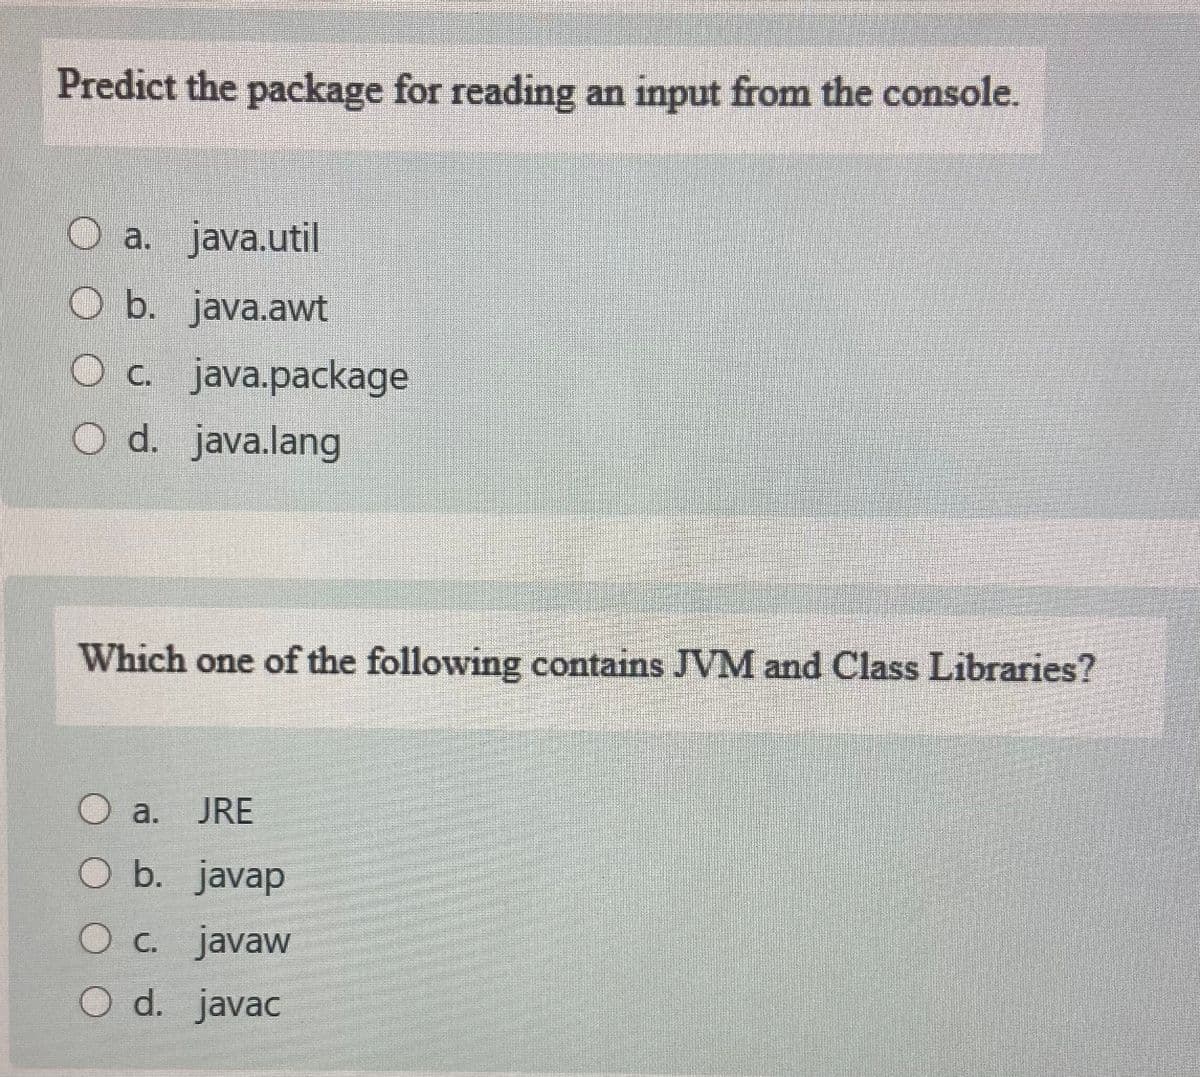 Predict the package for reading an input from the console.
a. java.util
O b. java.awt
Oc java.package
O d. java.lang
Which one of the following contains JVM and Class Libraries?
a.
JRE
O b. javap
O c. javaw
O d. javac
